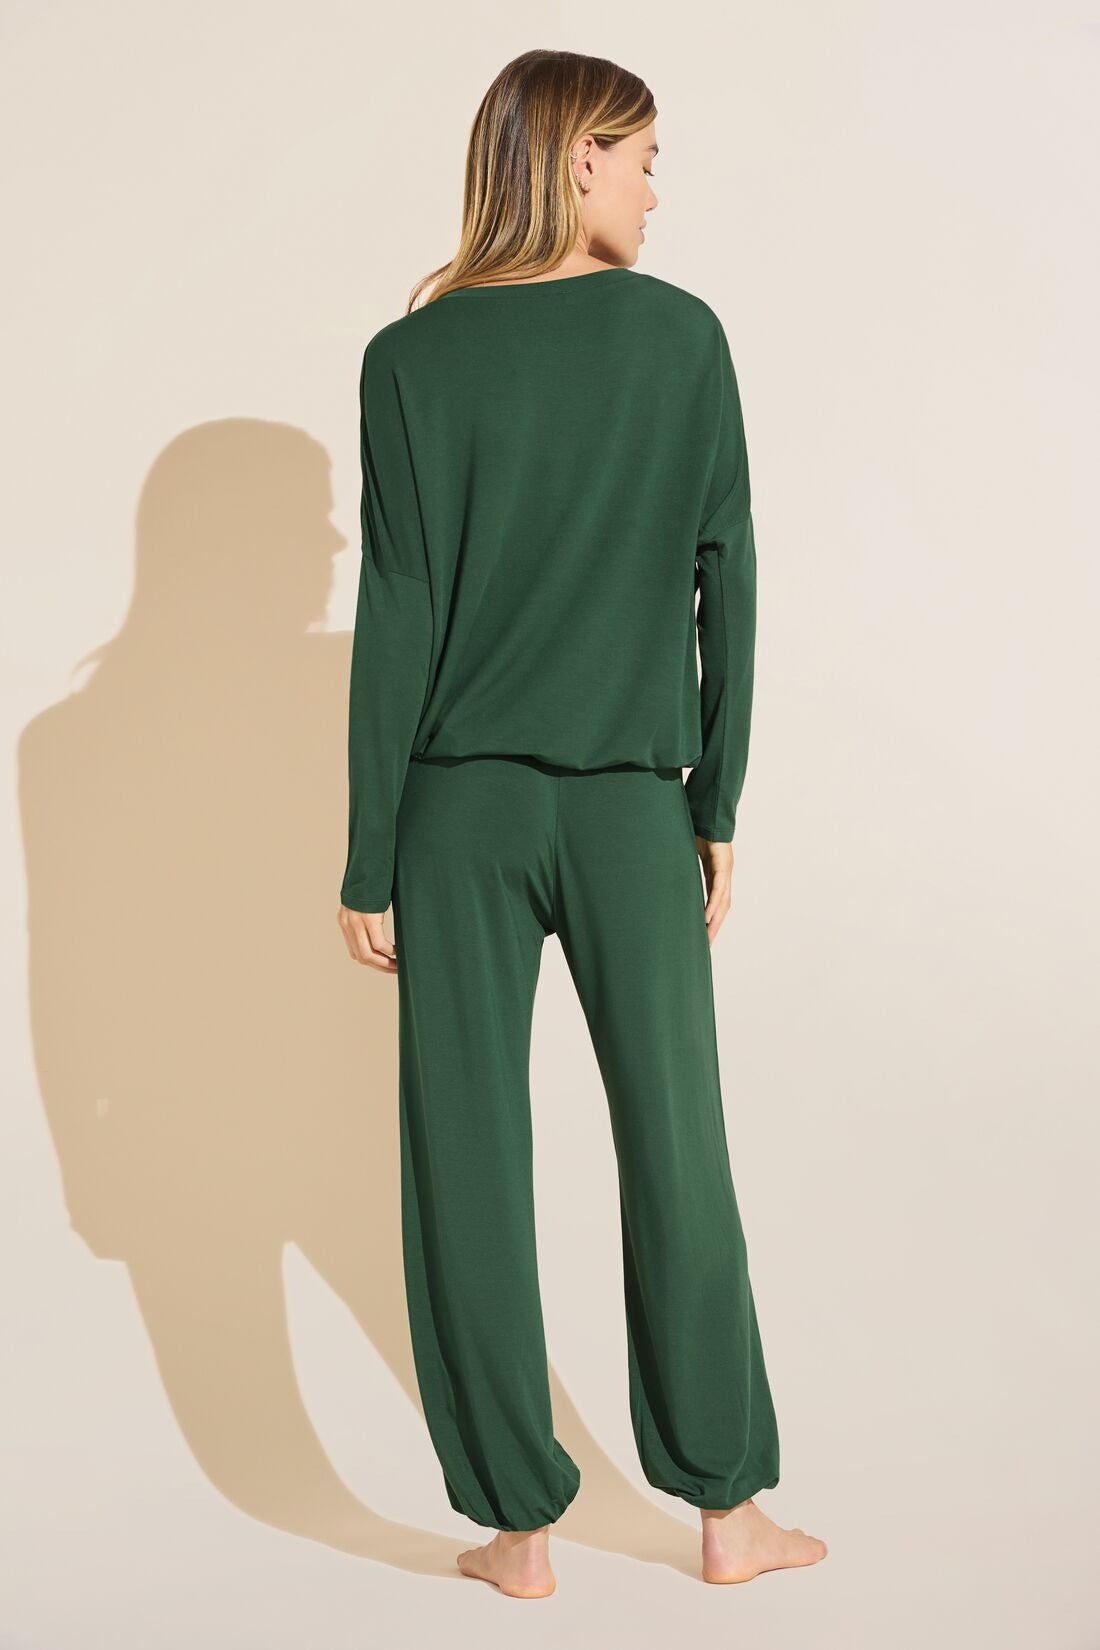 Gisele Slouchy Set in Forest Green – nk boutique baton rouge